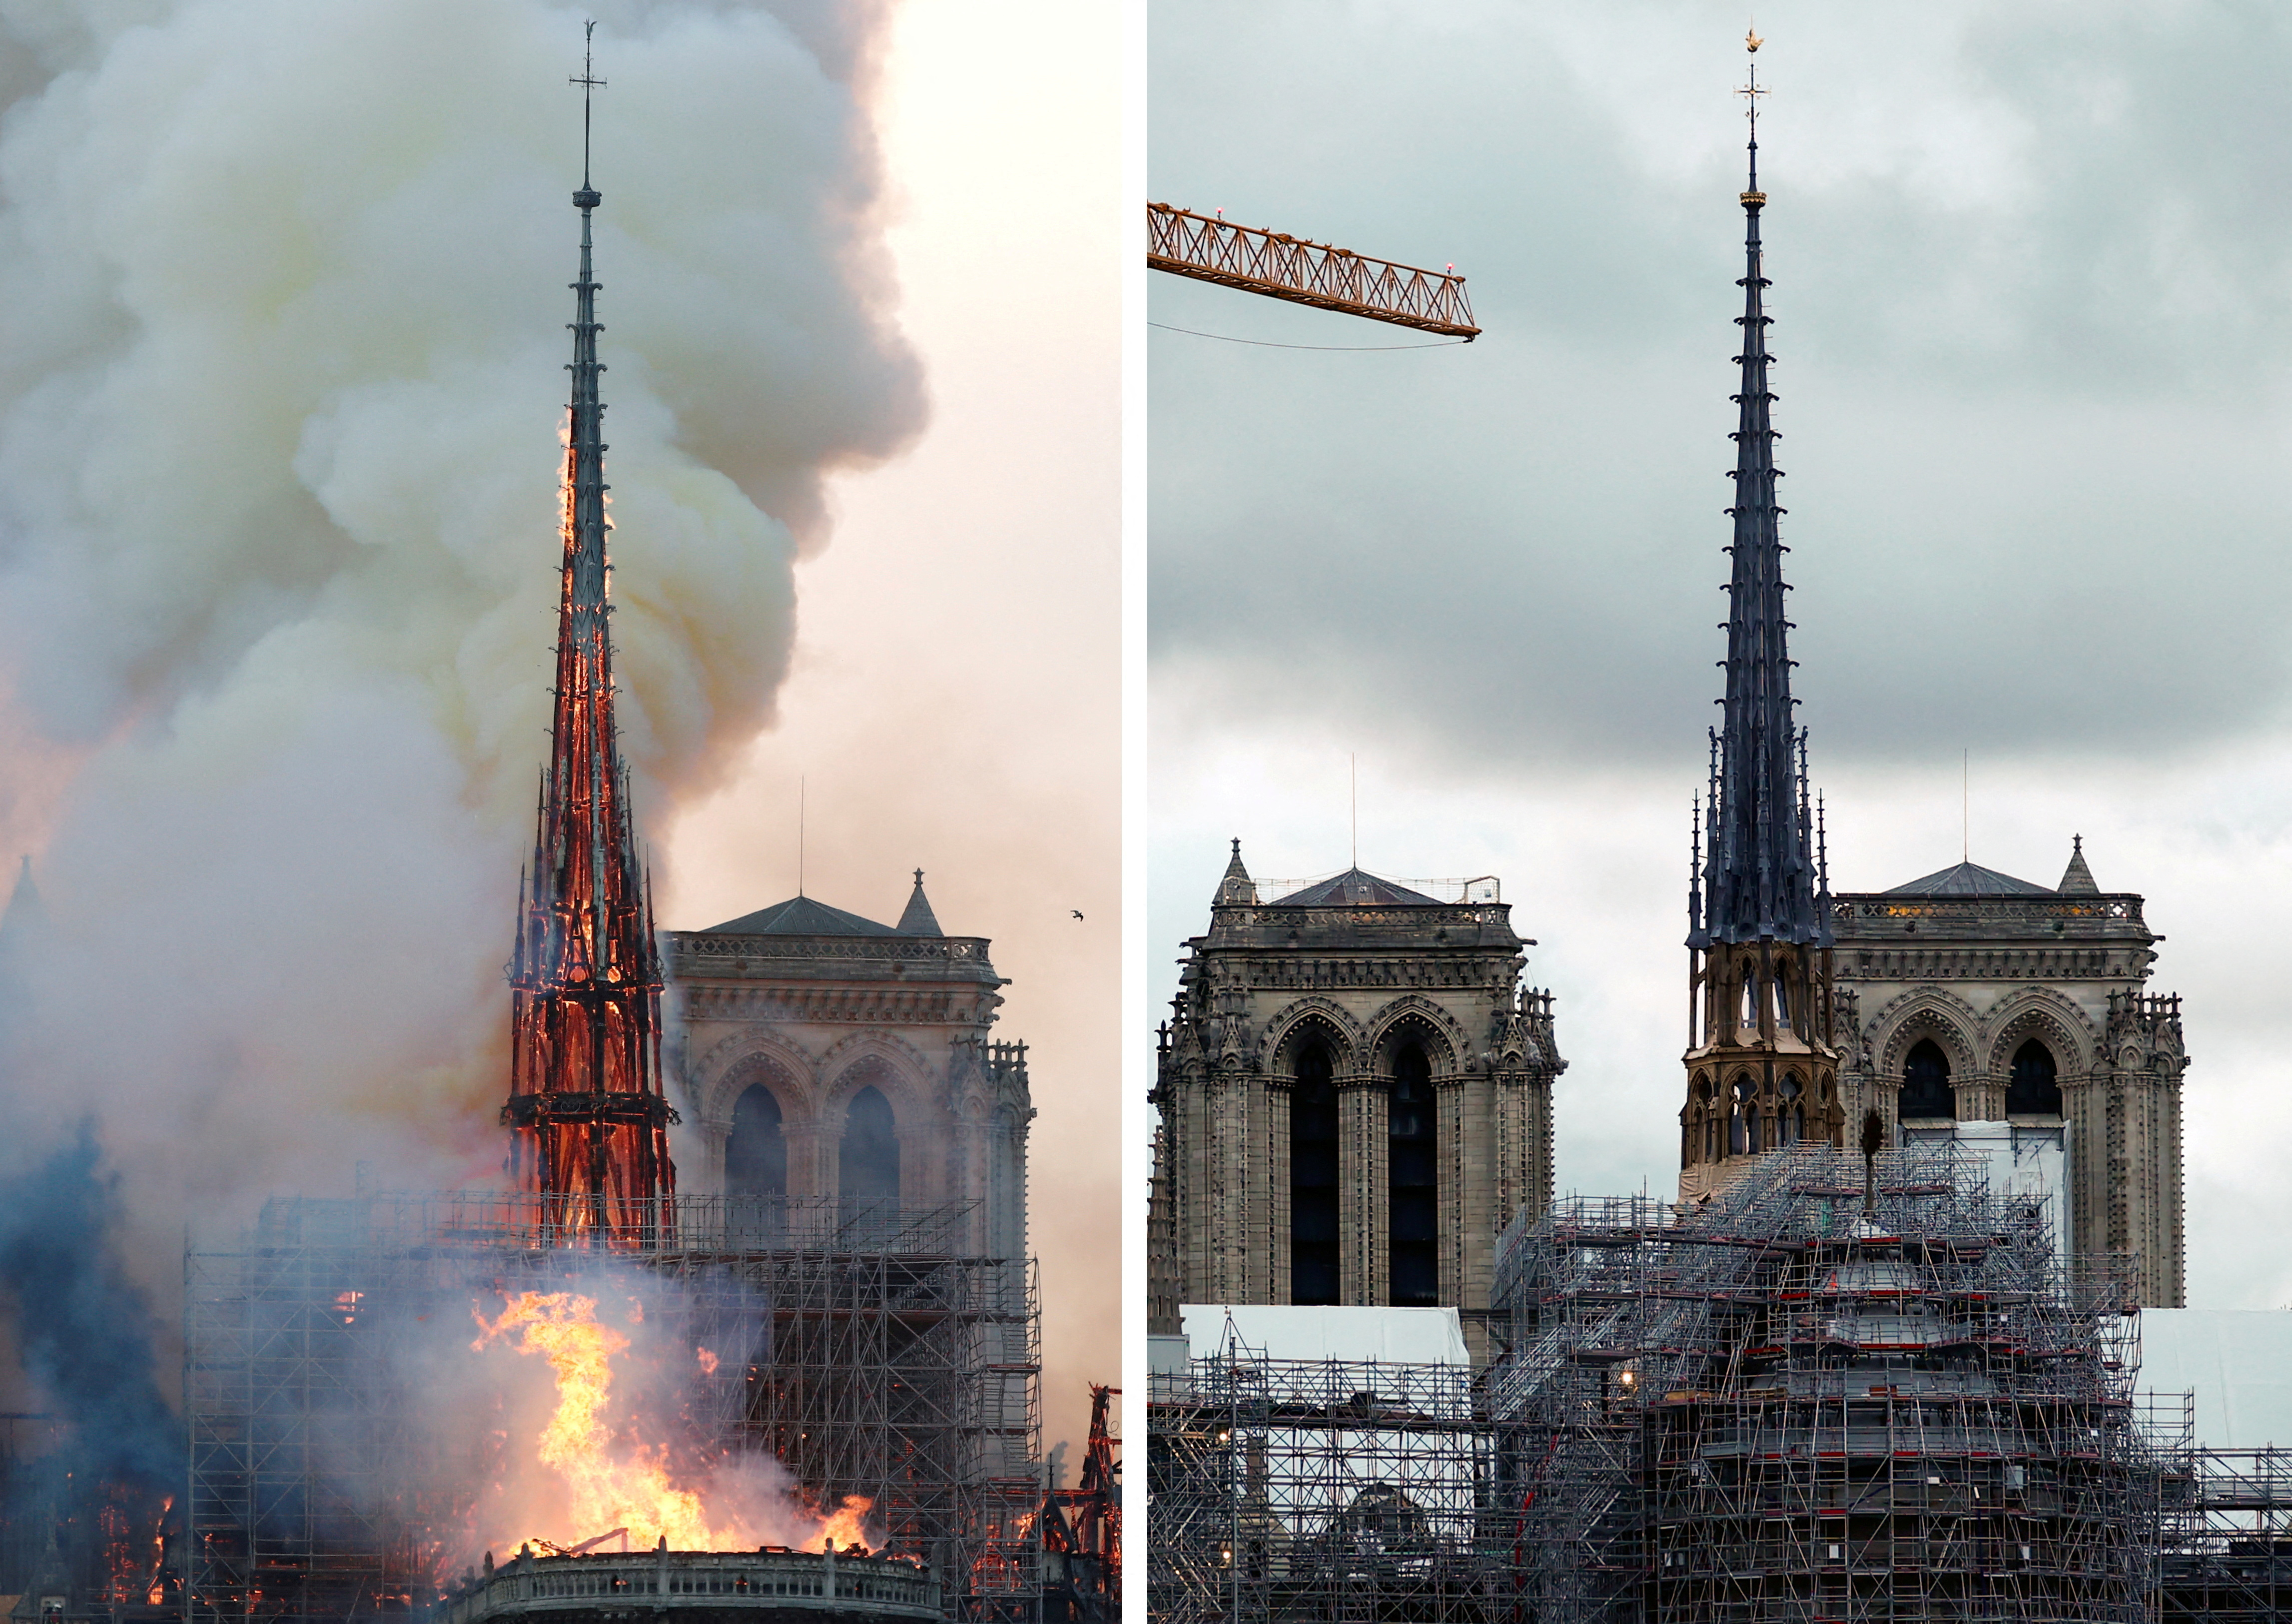 Five years after the fire, the spire of the Notre-Dame de Paris Cathedral visible again